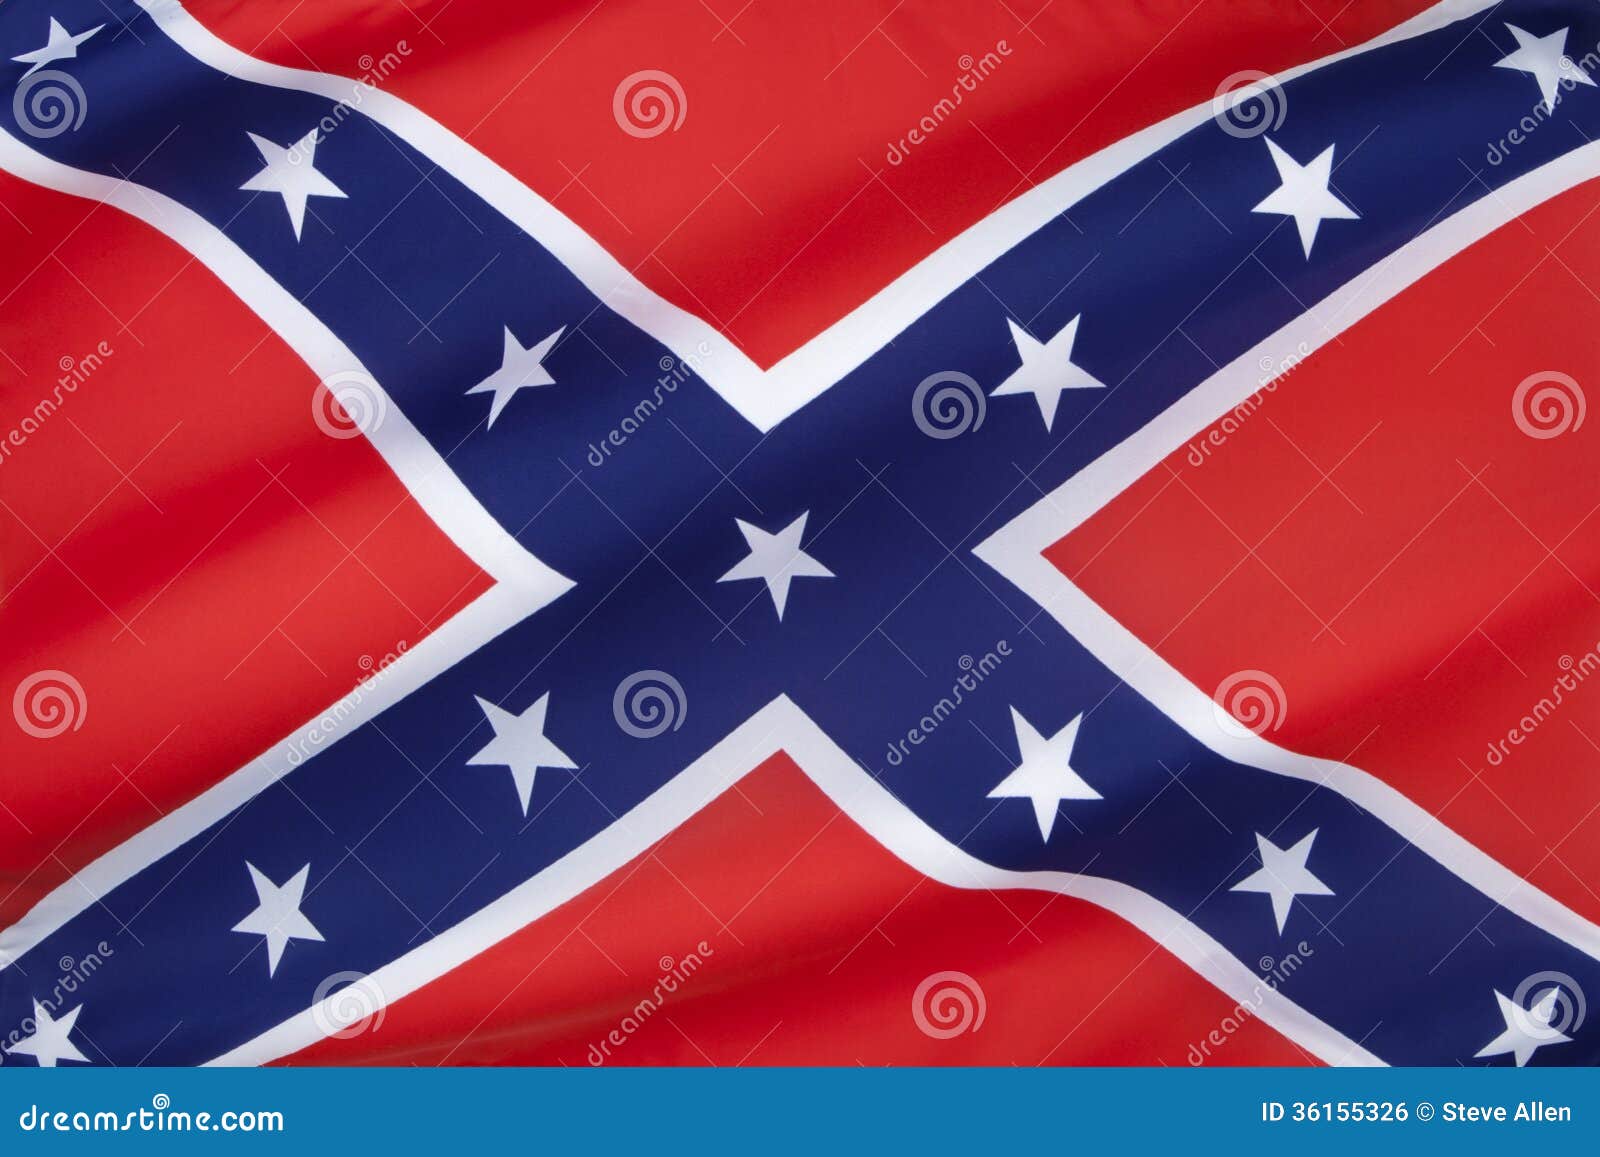 flag of the confederate states of america